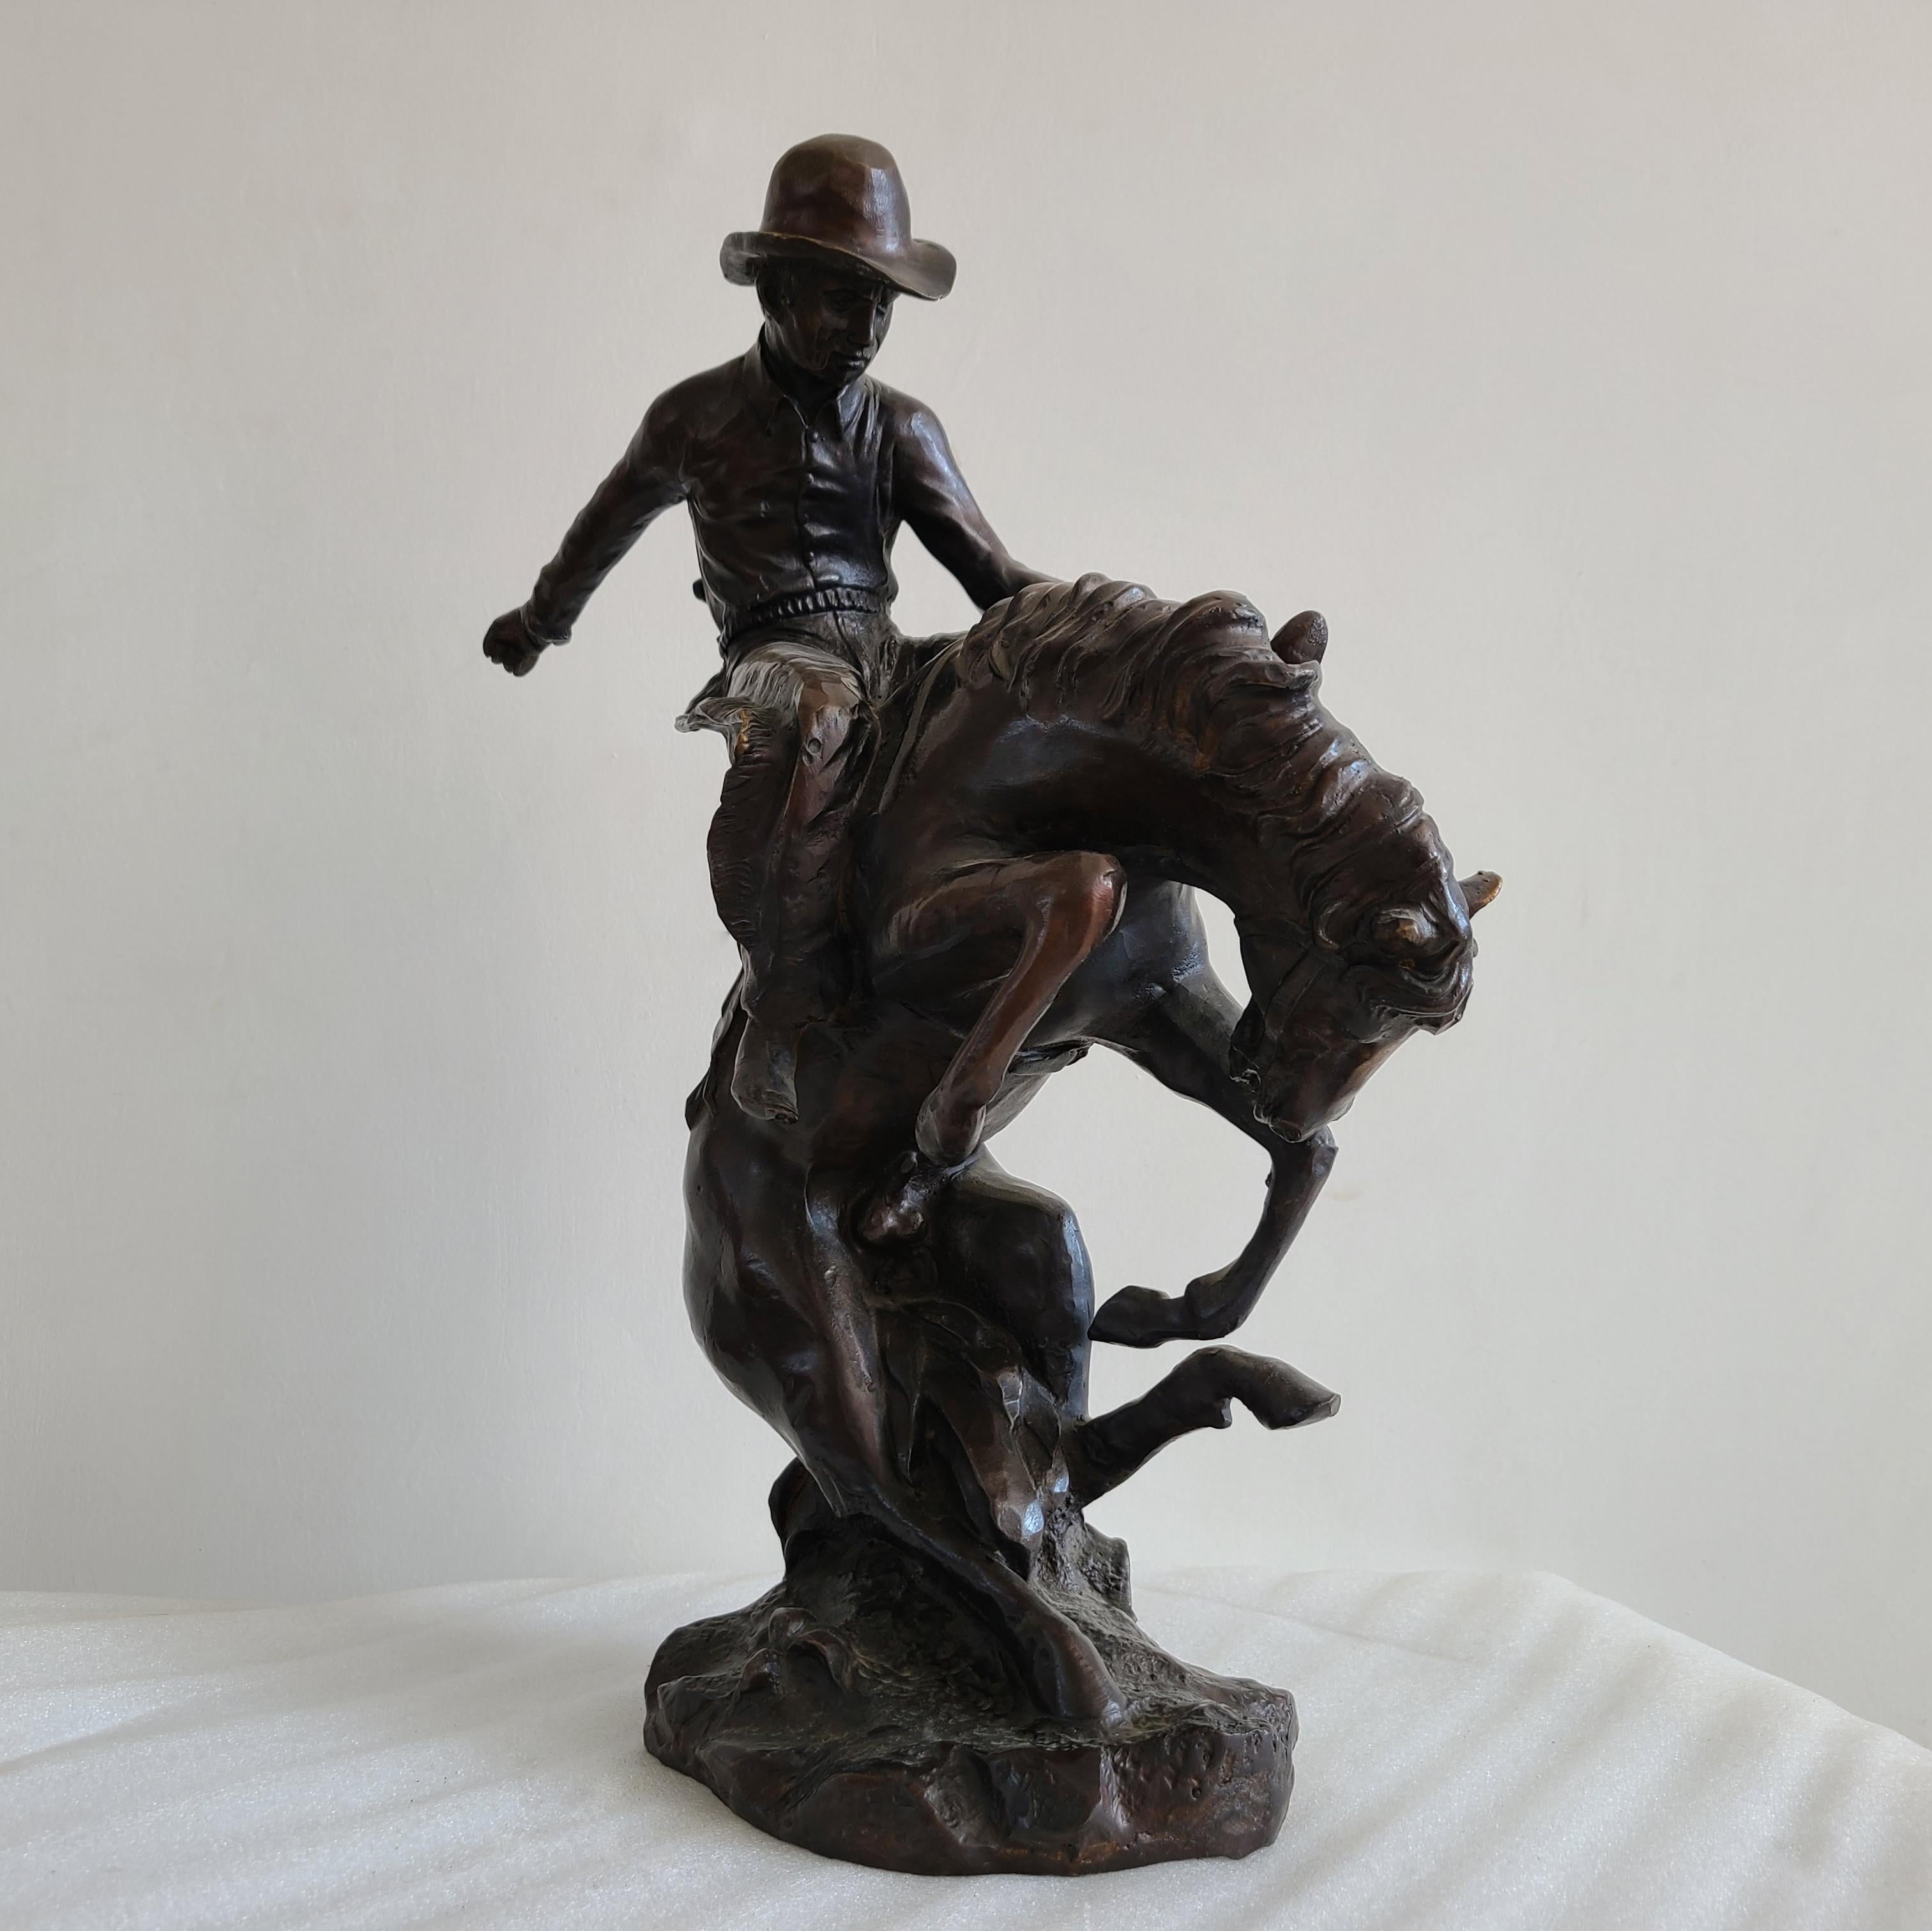 Bronze Cowboy Ridding Statue Bronze Outlaw Statue by Frederic Remington Replica Famous Art Crafts For Home Decor Ornament Gifts